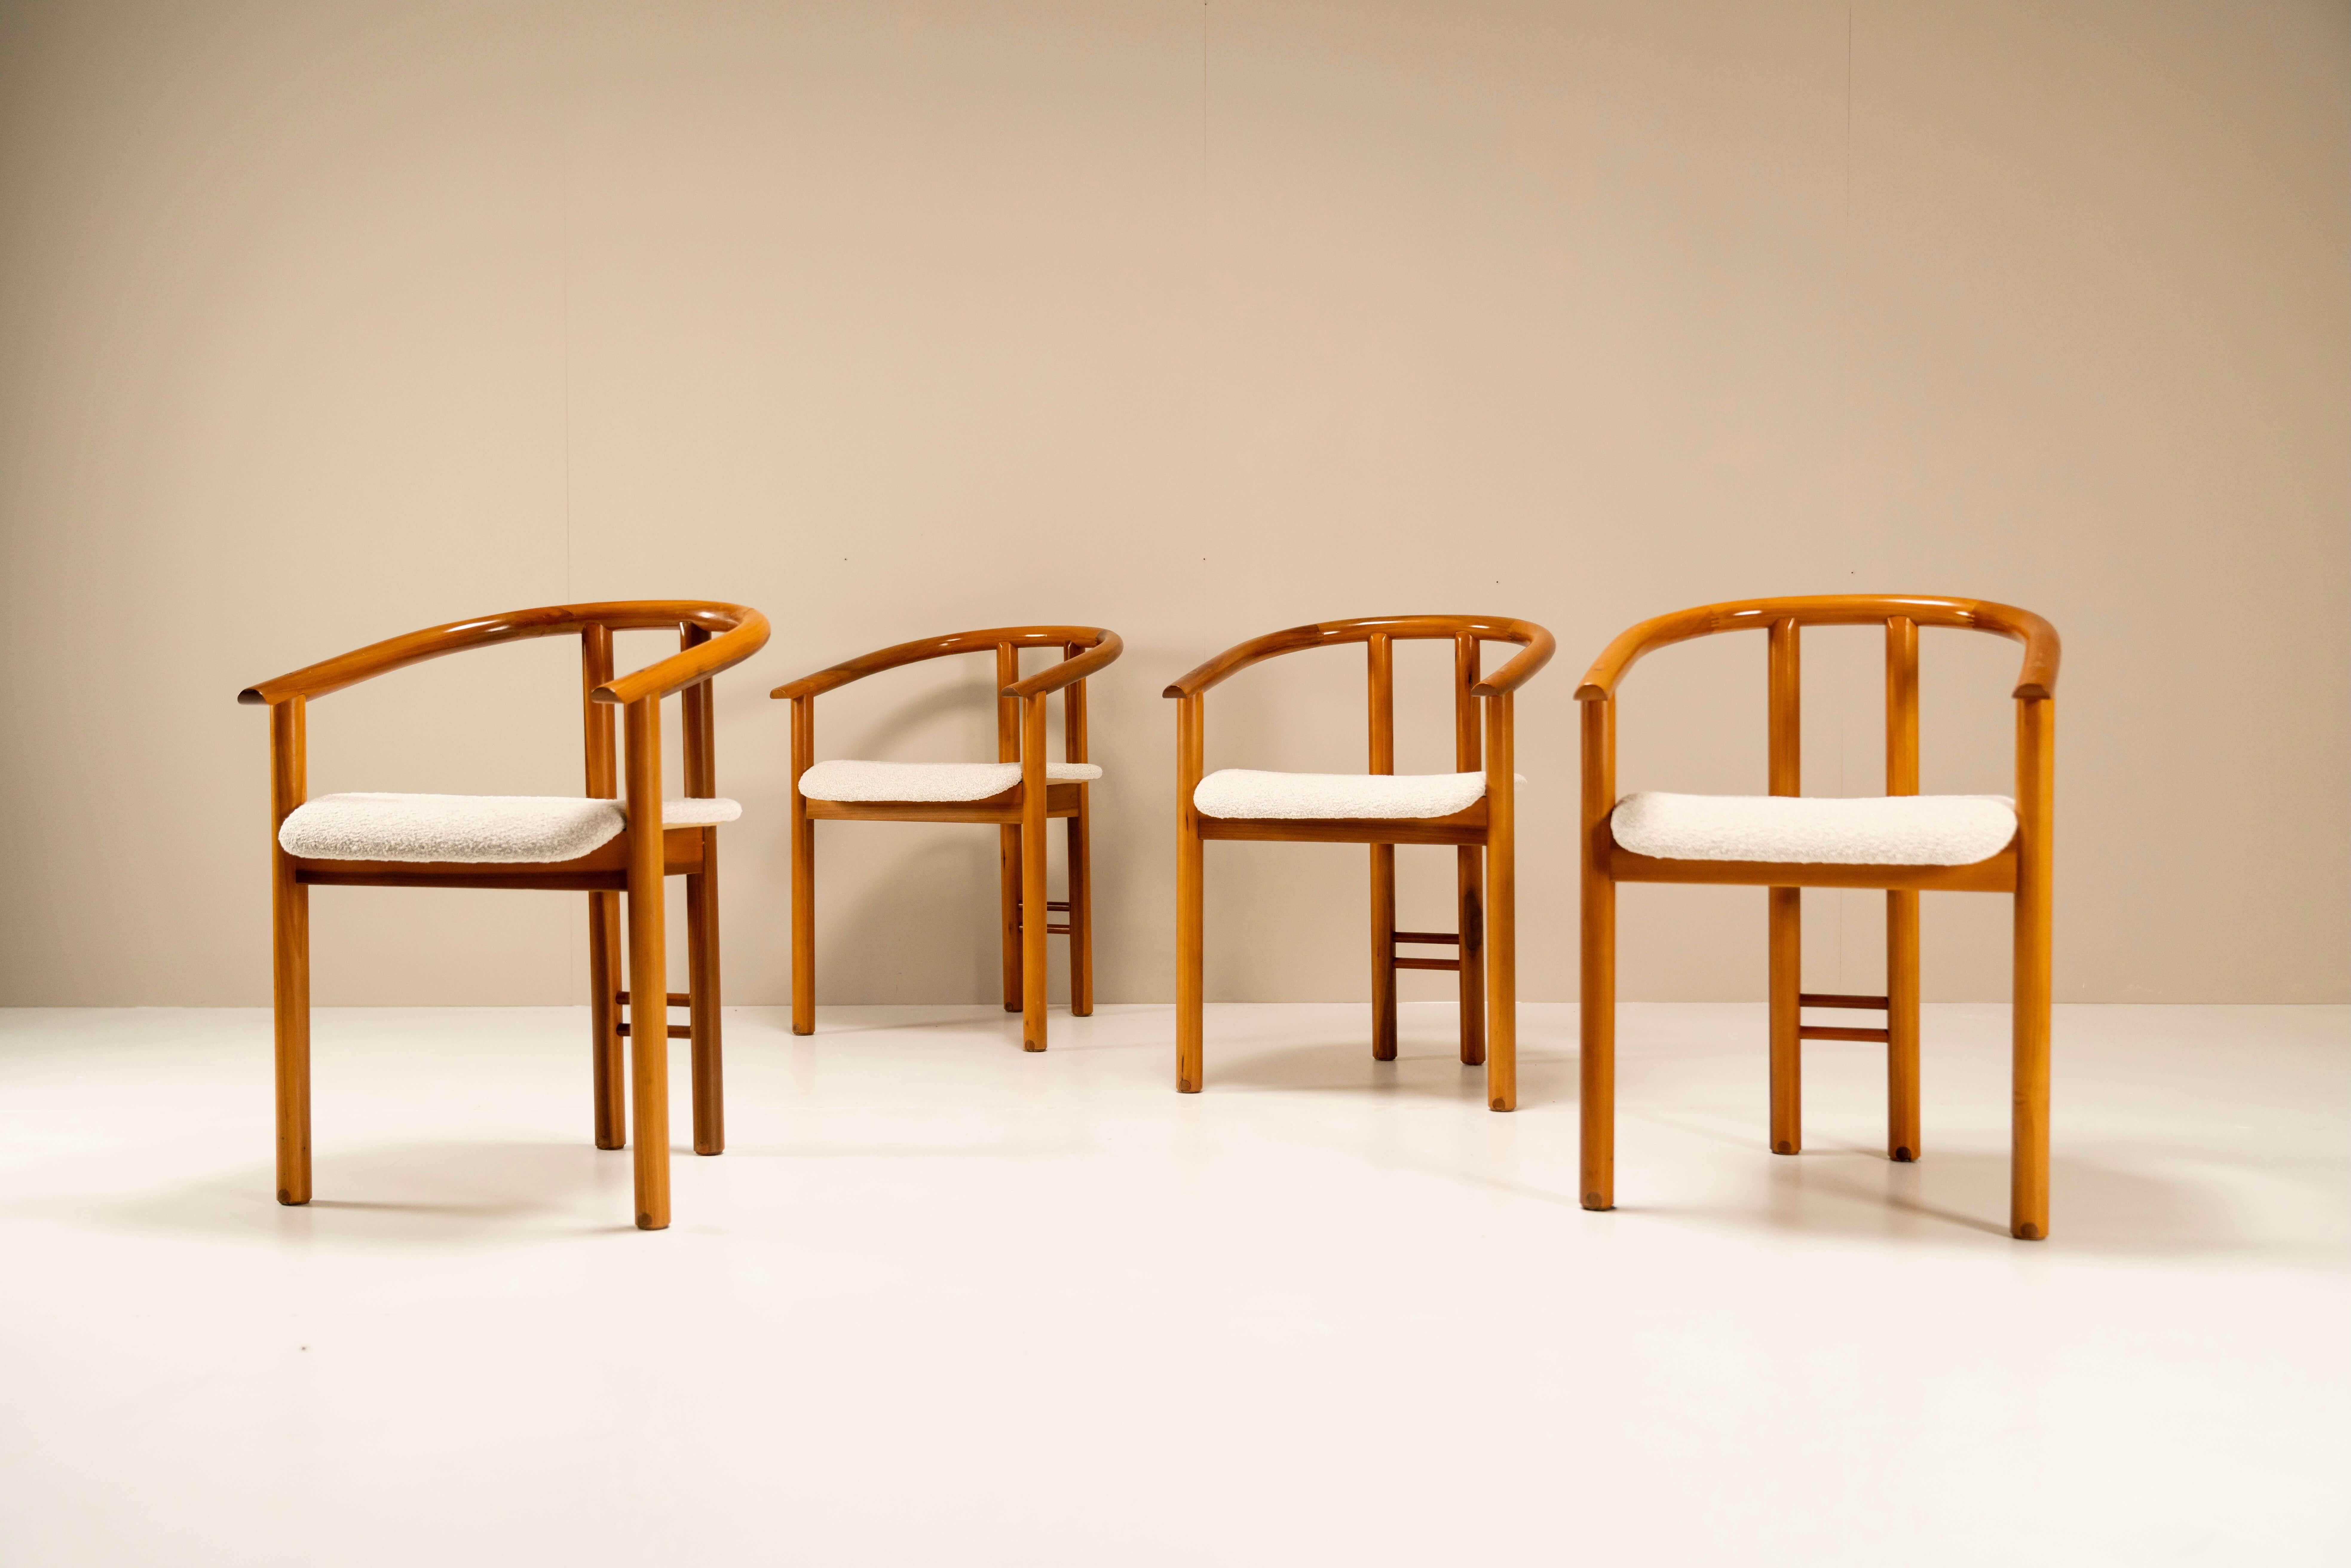 These very refined and rare dining room chairs in walnut wood are manufactured by the Italian Mobil Girgi company in the 1970s. The frame is ingeniously put together and when we look at the chair in detail, we see frequent use of beautiful wood